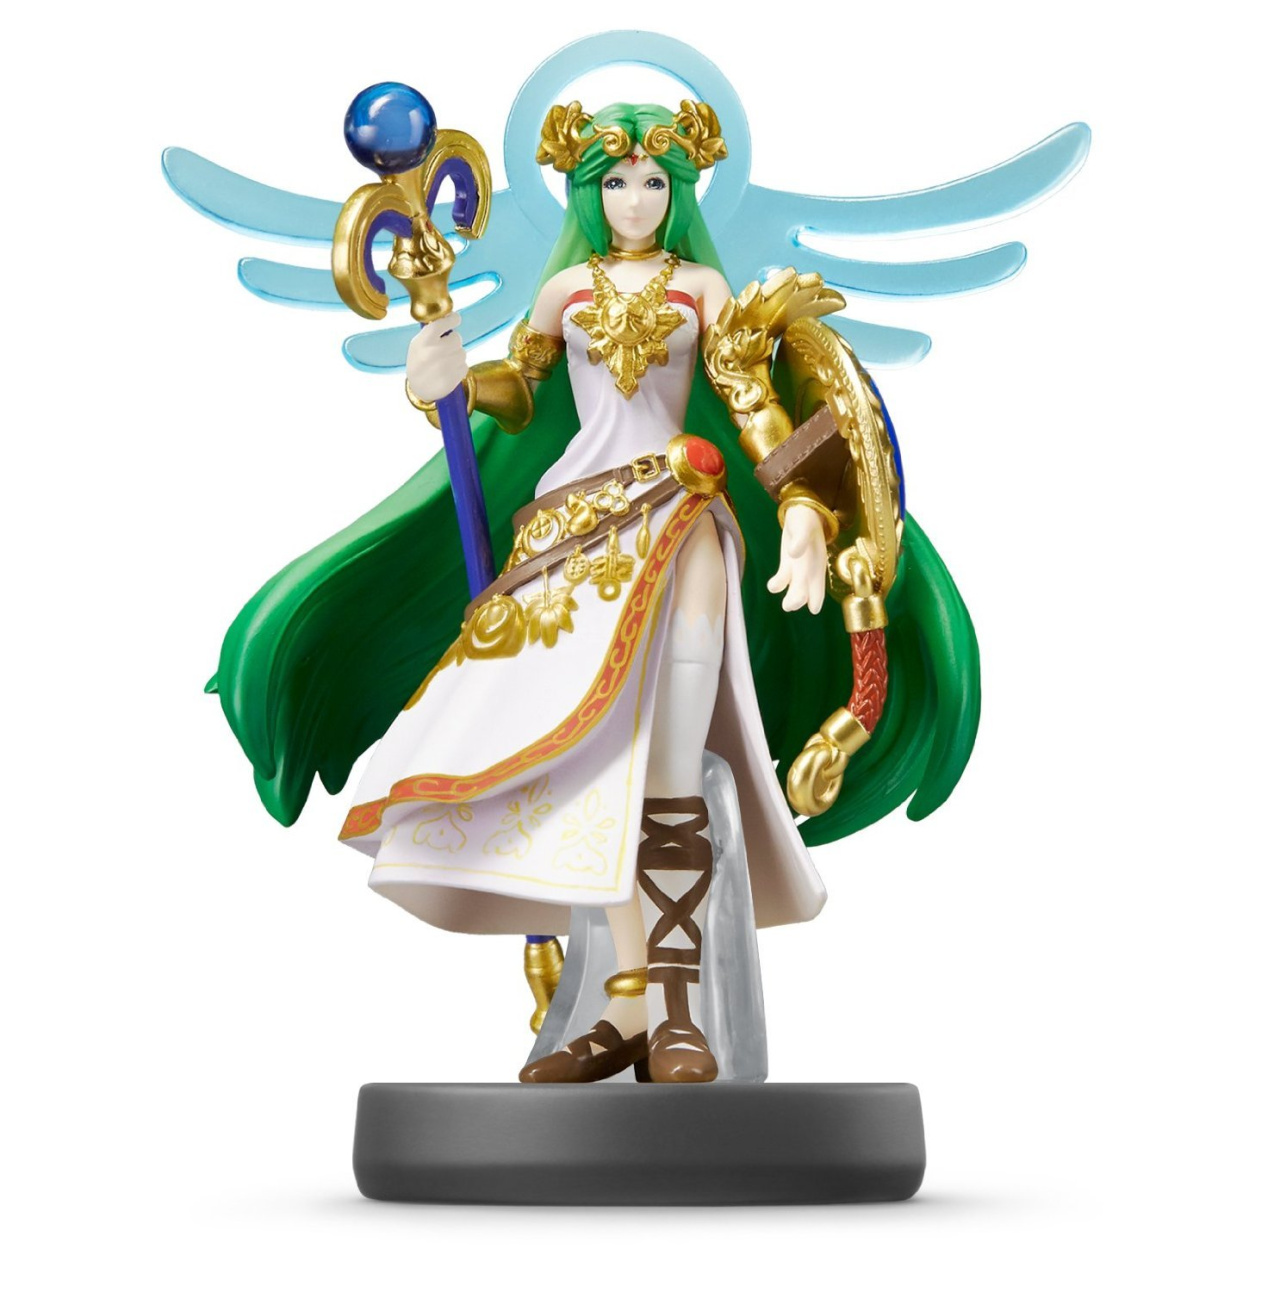 How old is palutena